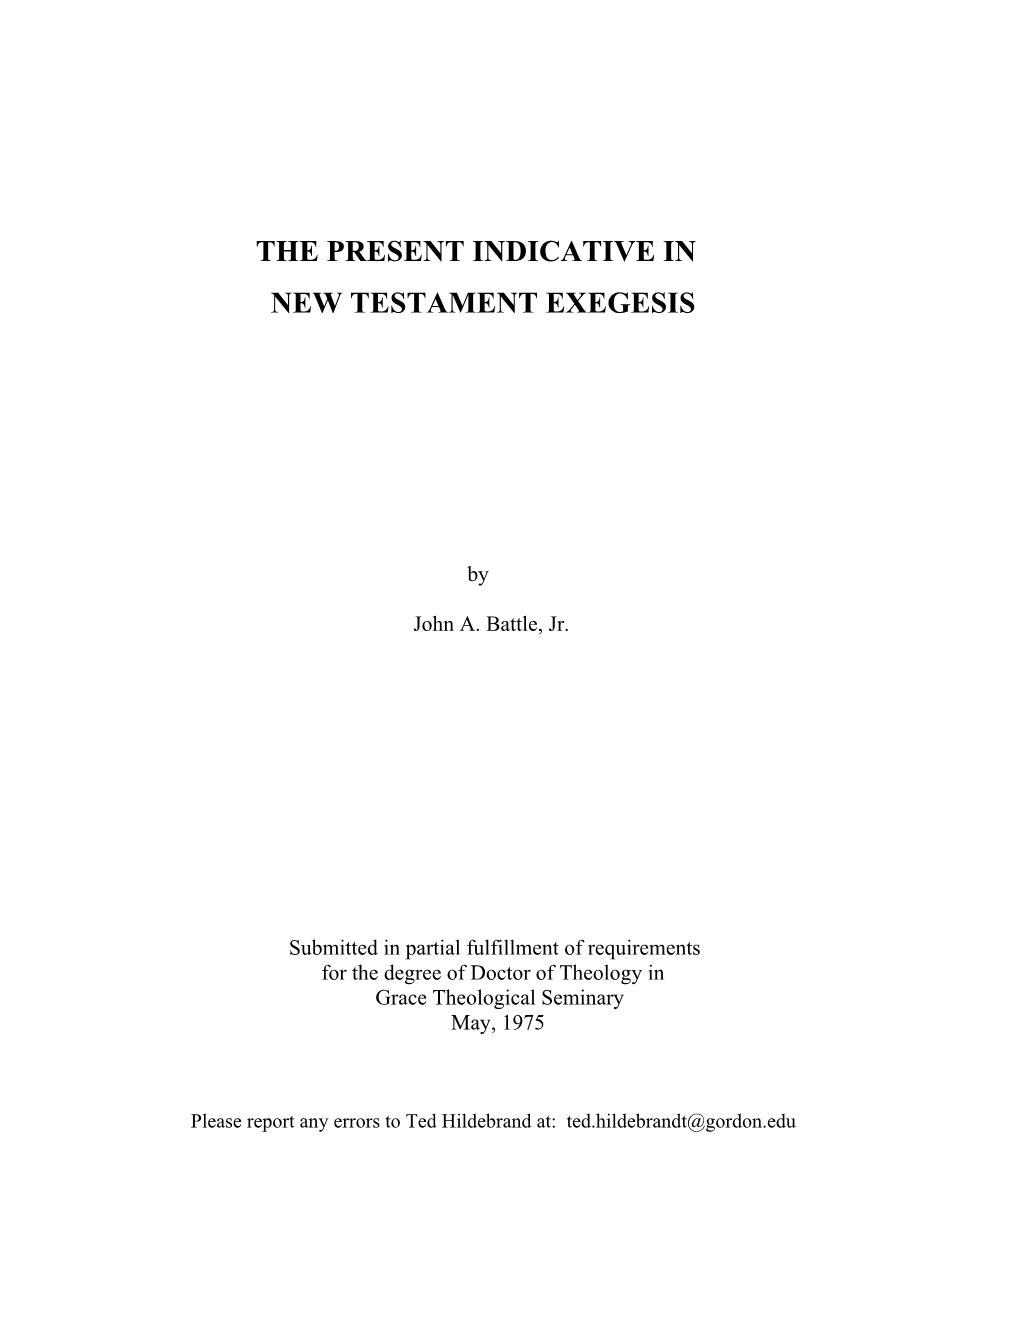 The Present Indicative in New Testament Exegesis